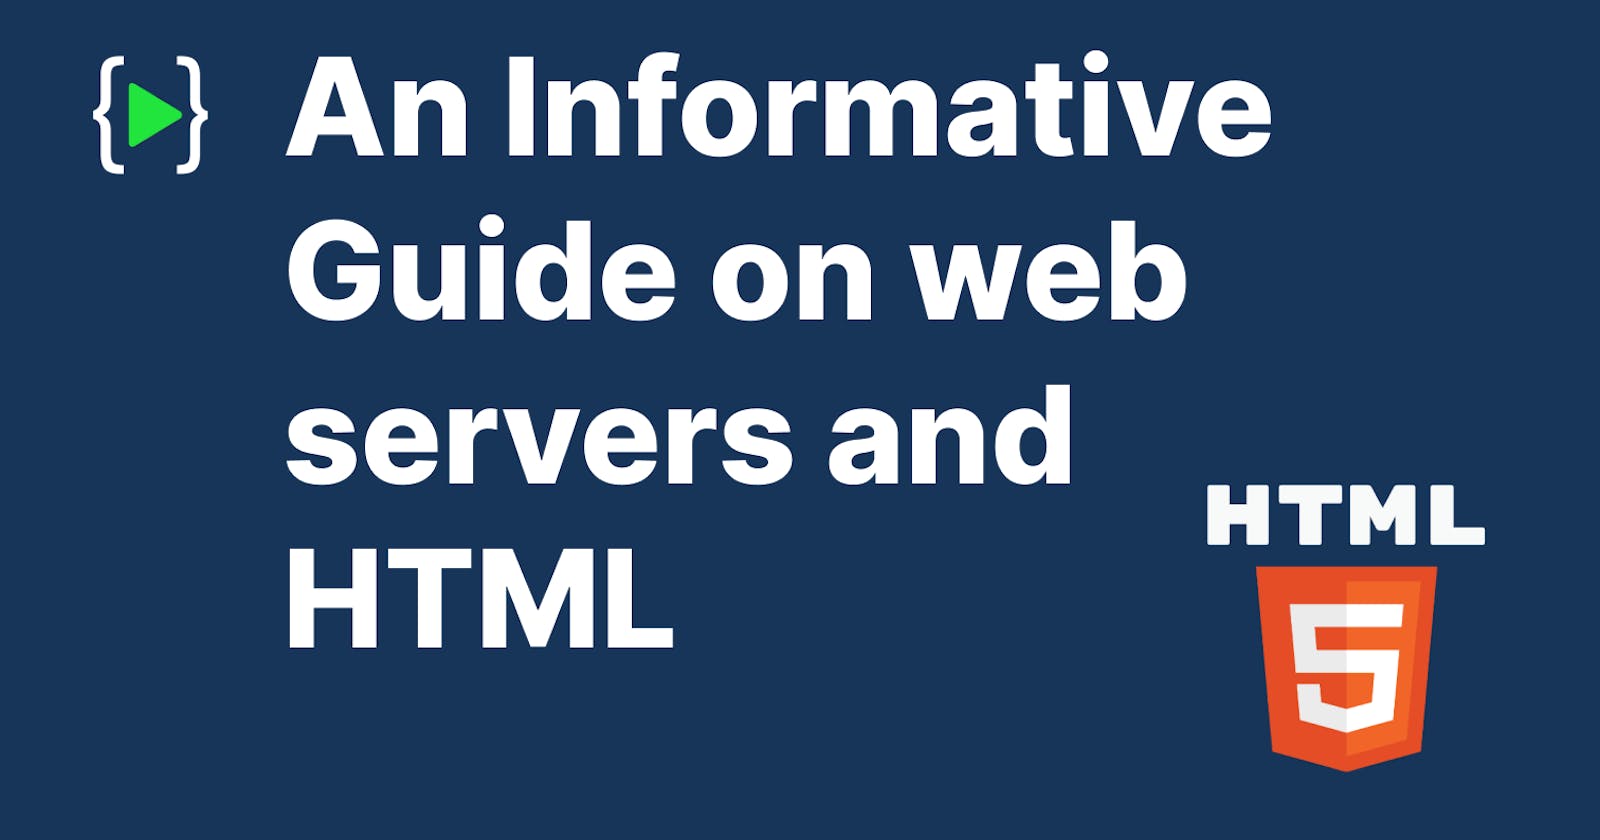 An Informative Guide on web servers and HTML